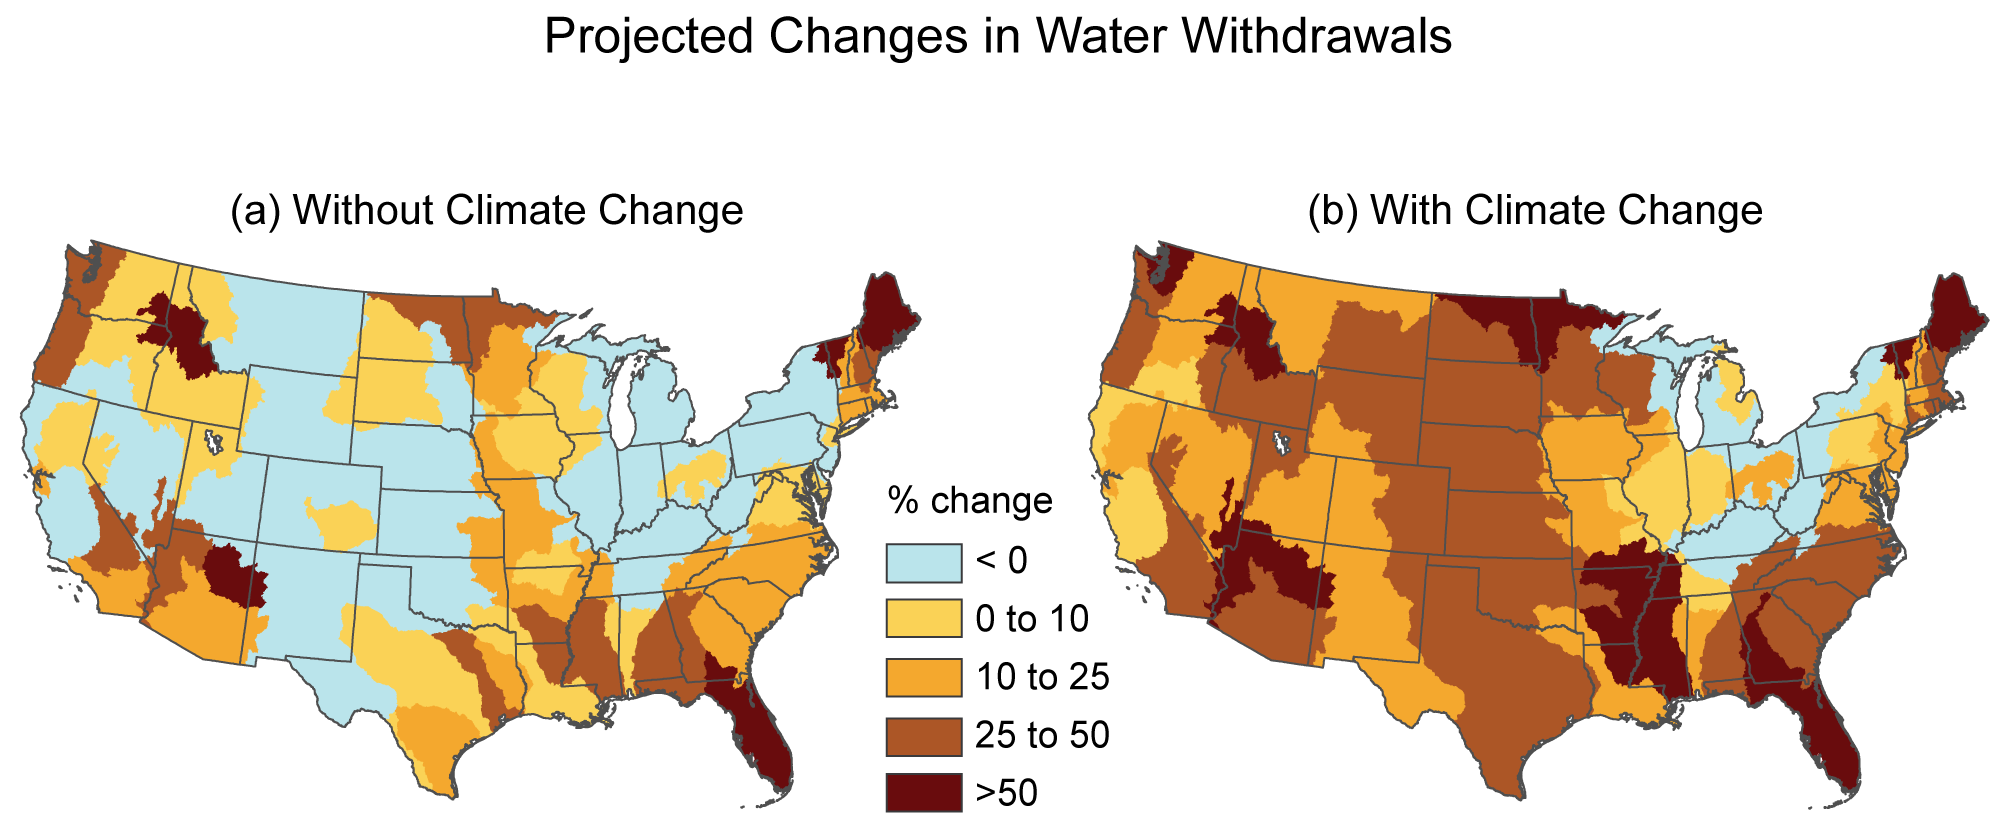 Projected Changes in Water Withdrawals